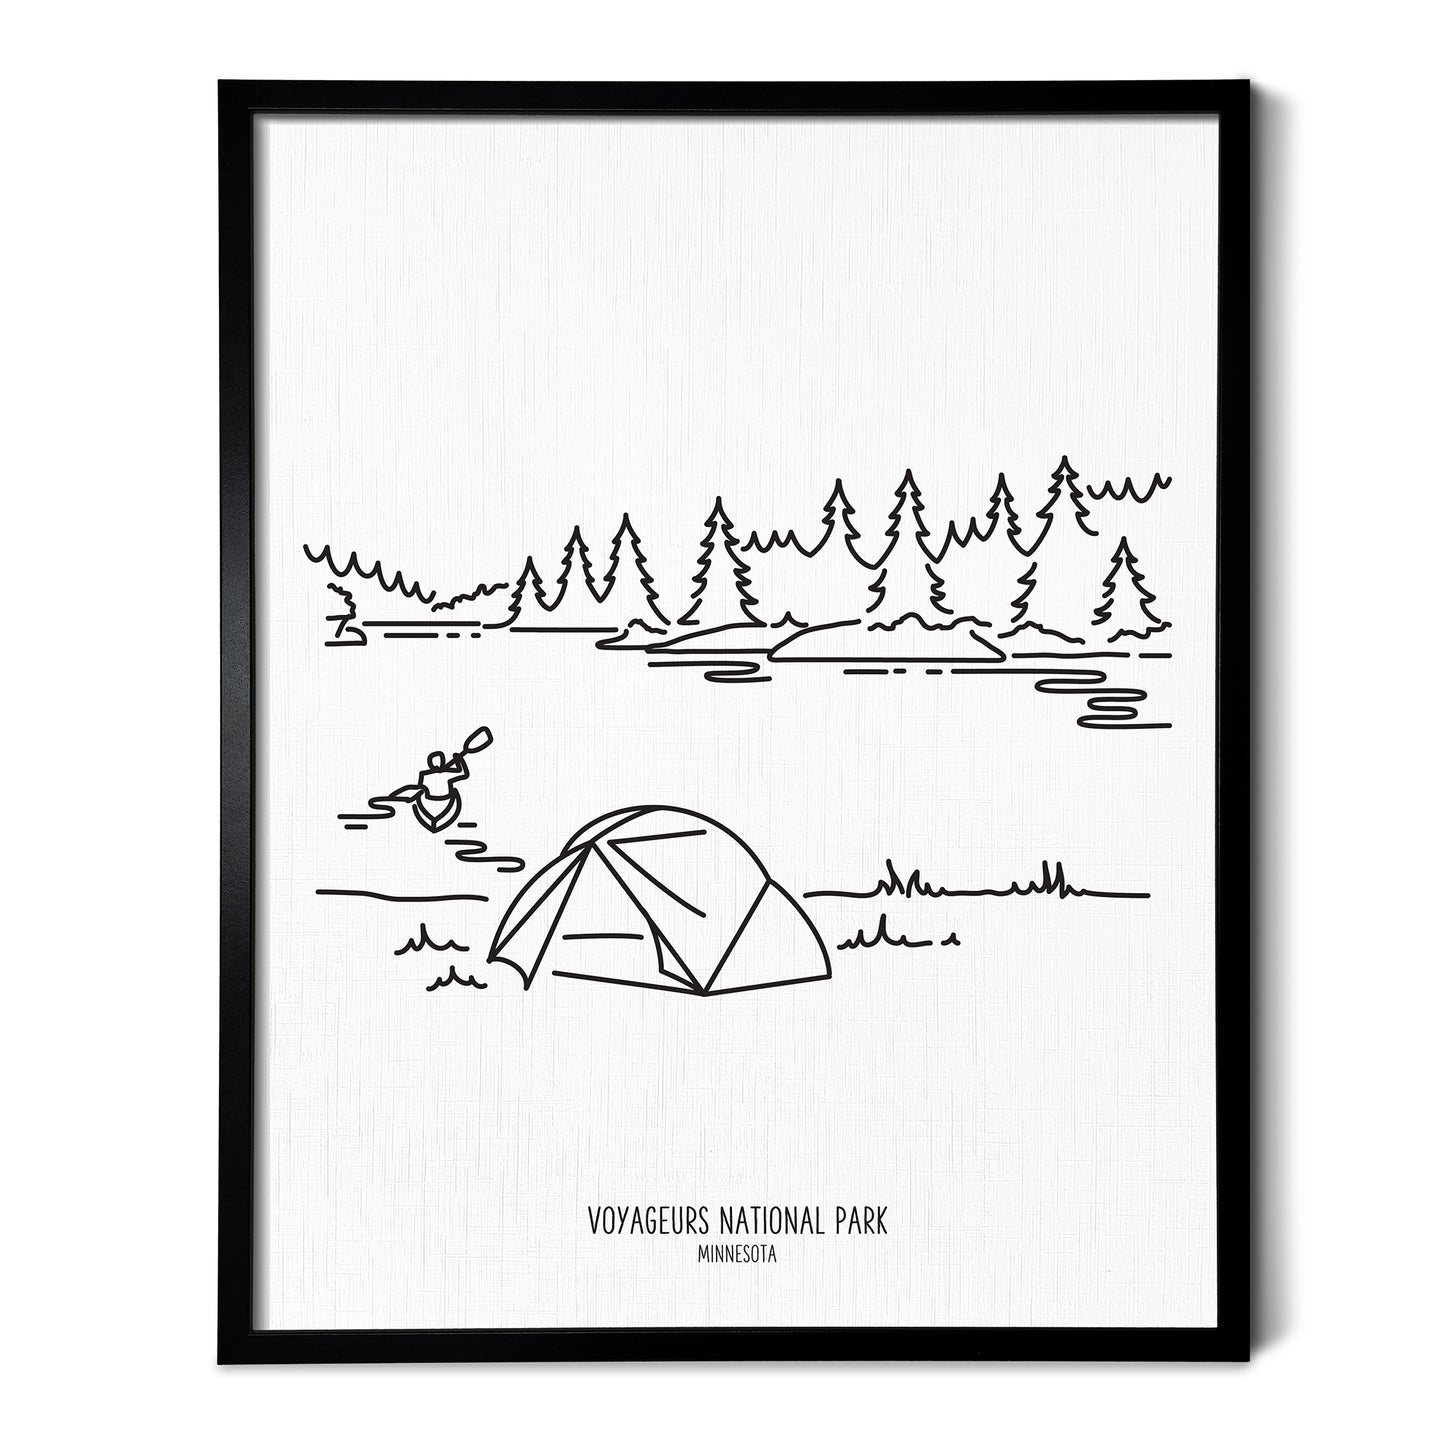 A line art drawing of Voyageurs National Park on white linen paper in a thin black picture frame